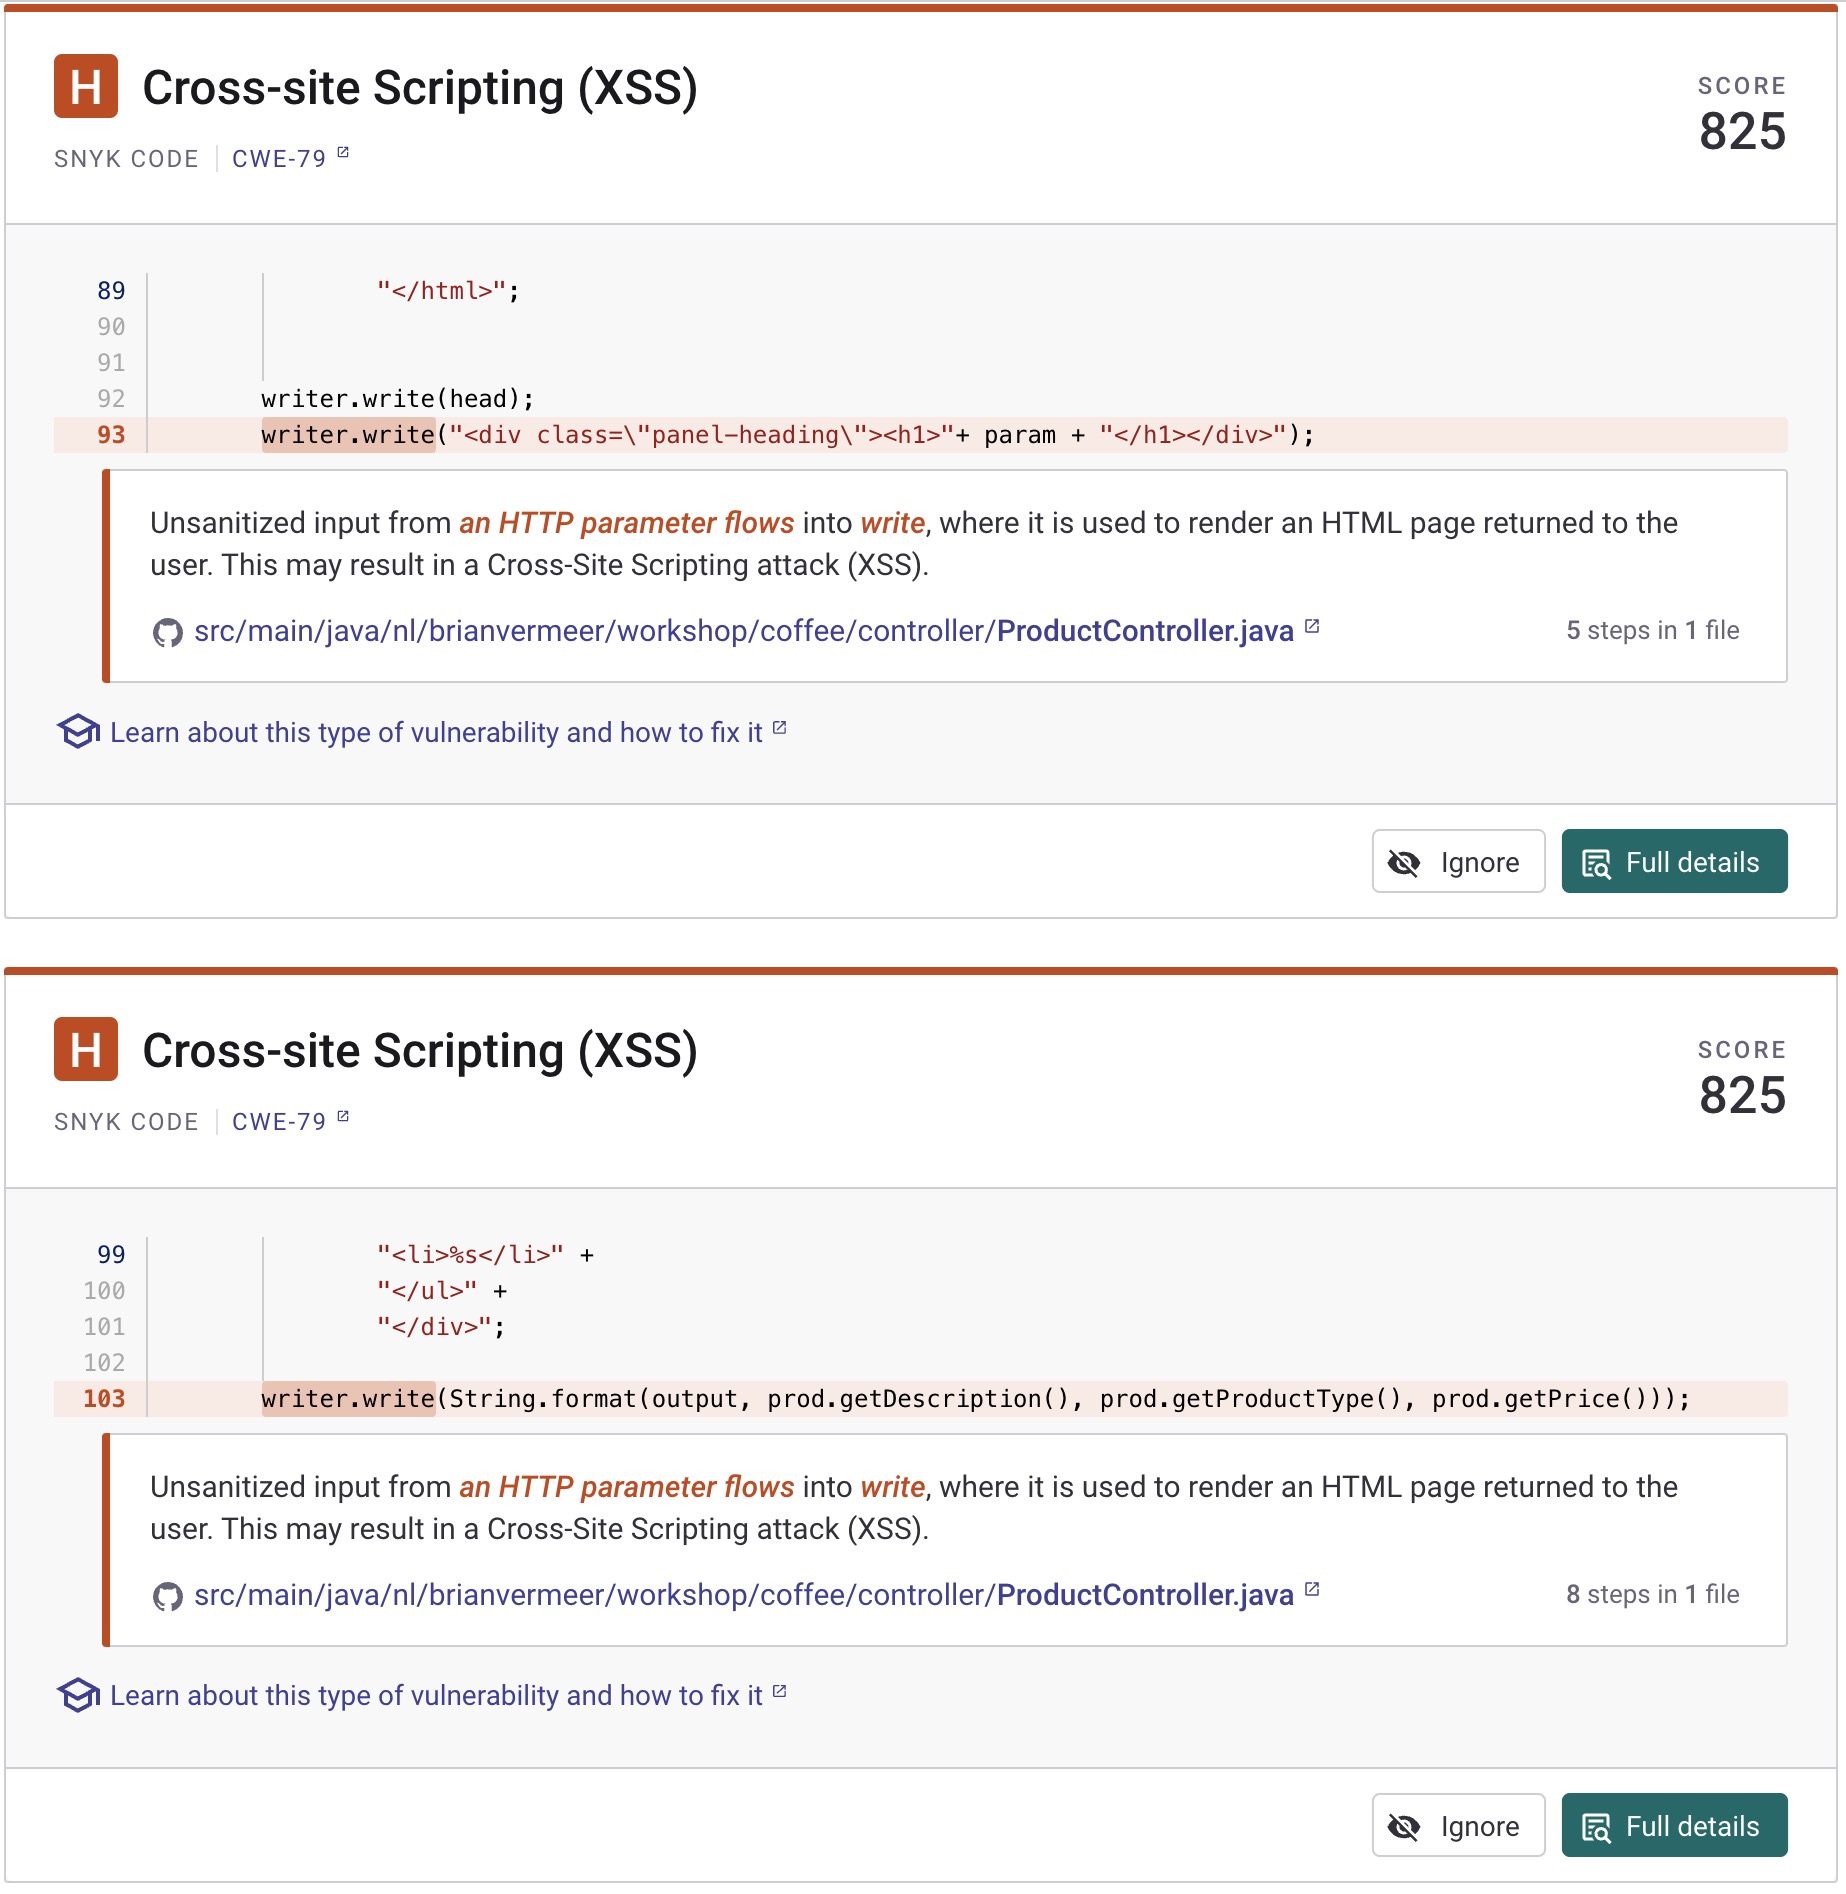 What is cross-site scripting (XSS) and how to prevent it?